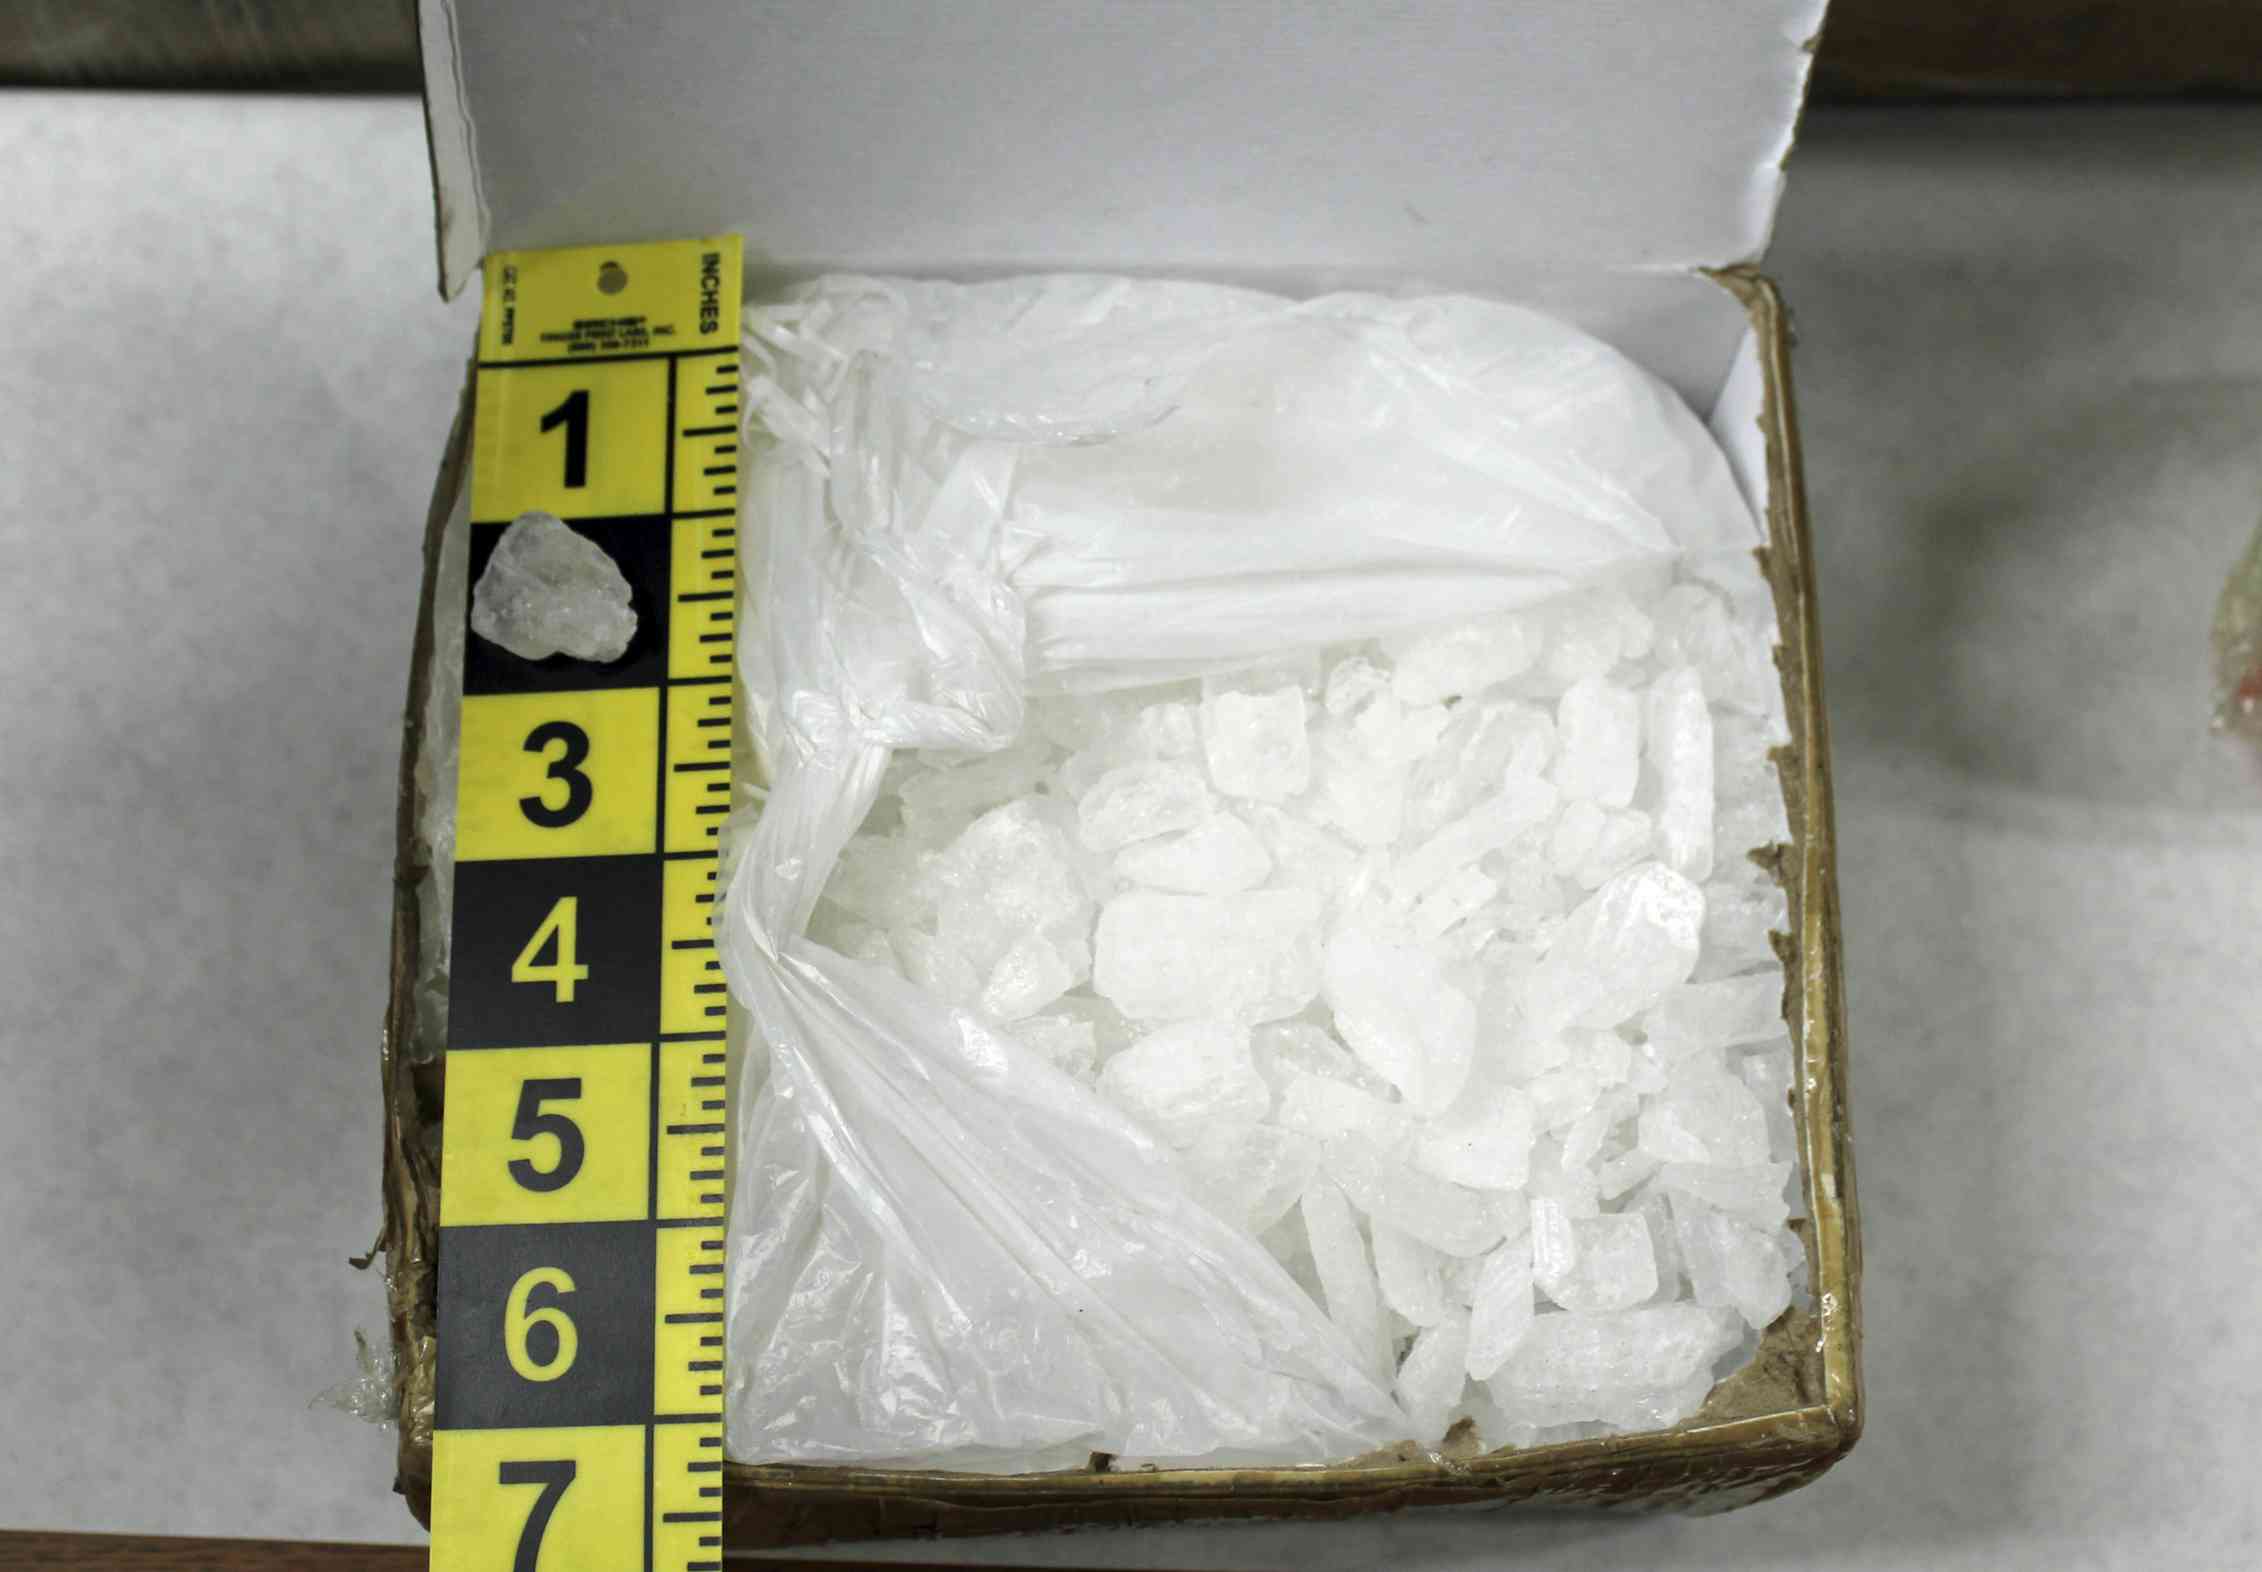 A Nazi Drug S Us Resurgence How Meth Is Making A Disturbing Reappearance